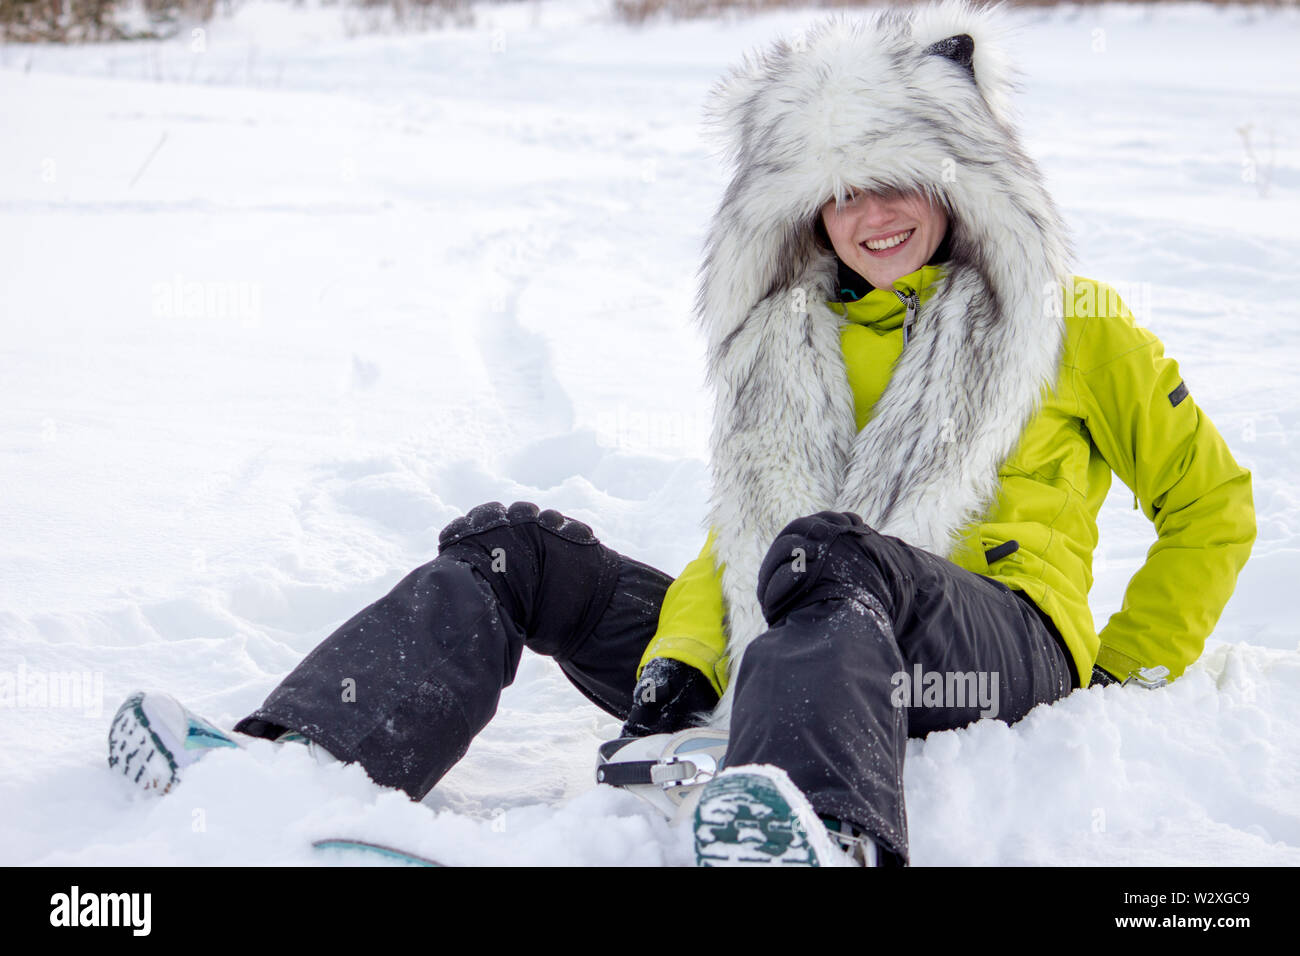 Sports girl in animal hat with ears. Funny snowboarding concept. Stock Photo